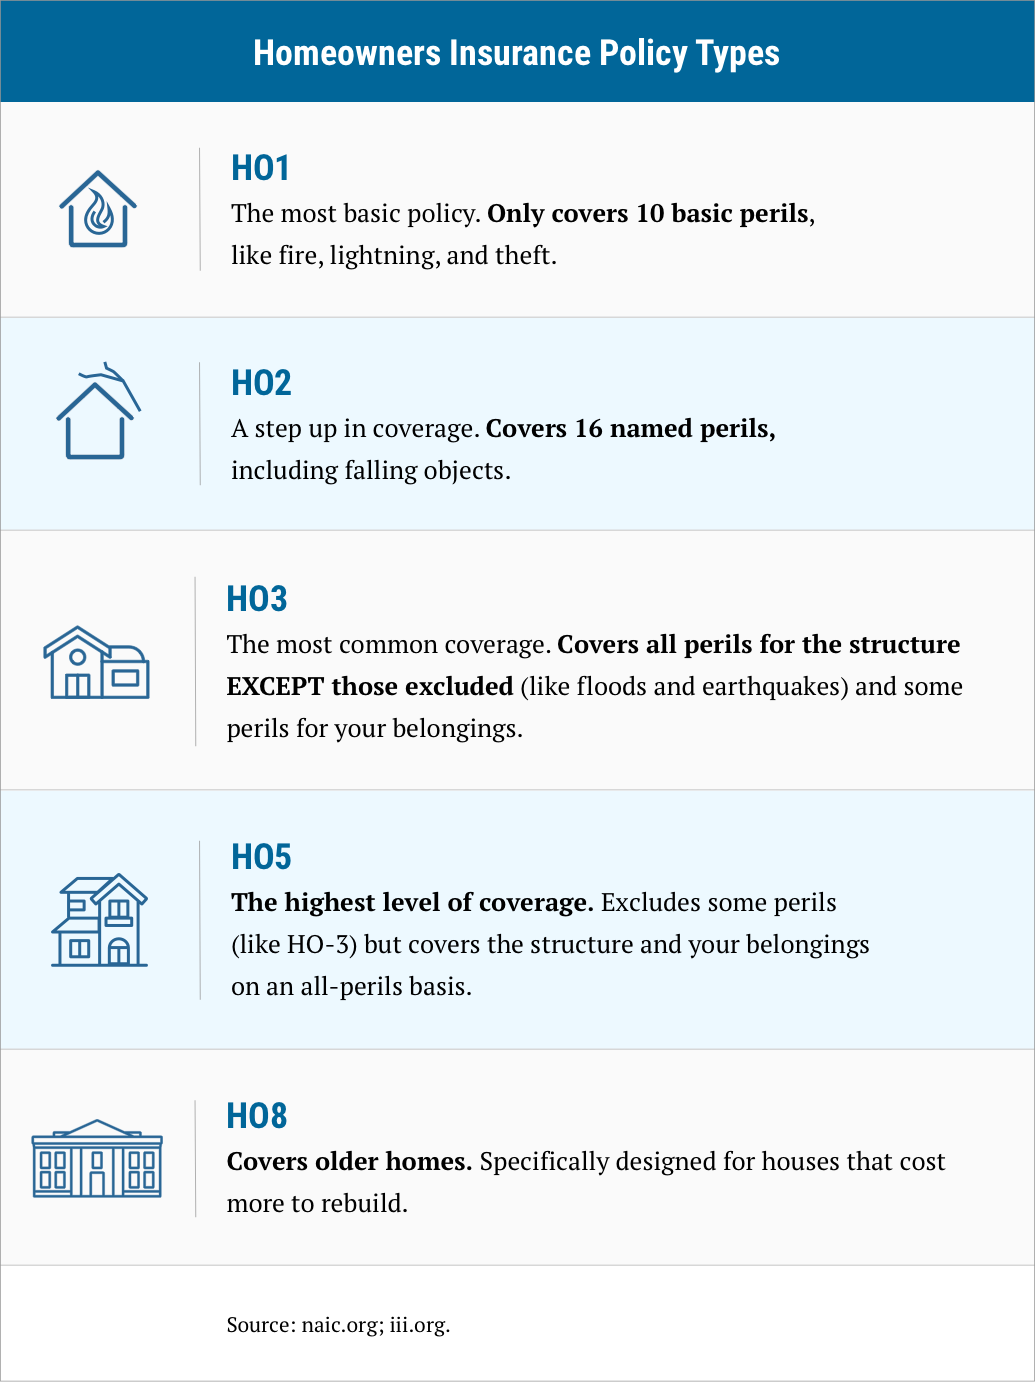 description of Homeowner policy types, from HO1 to HO8